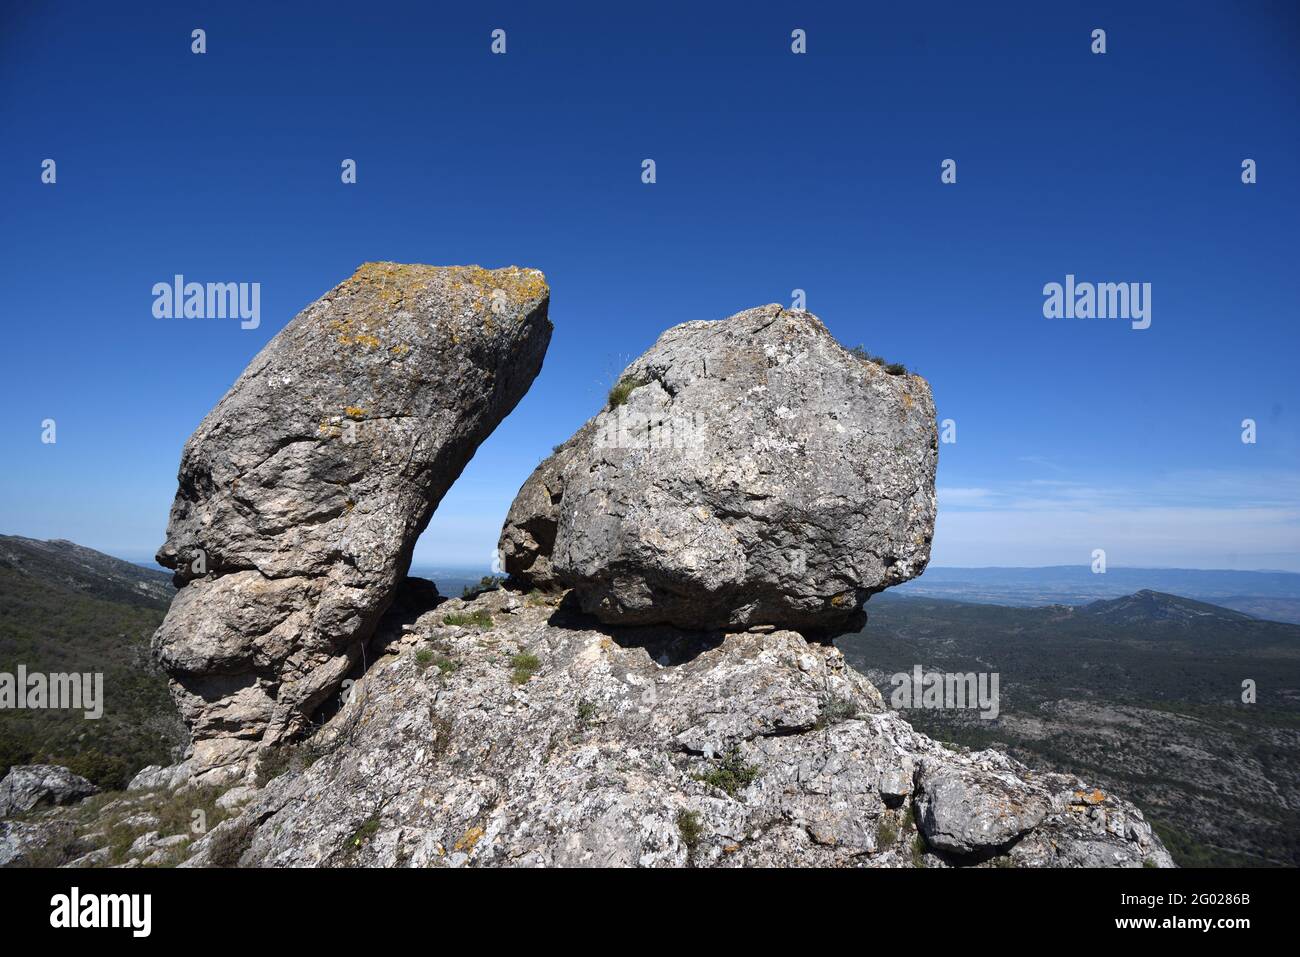 Balanced Rocks or Rock Formations on the Pic des Mouches at the Eastern End of the Montagne Sainte-Victoire Ridge Provence France Stock Photo